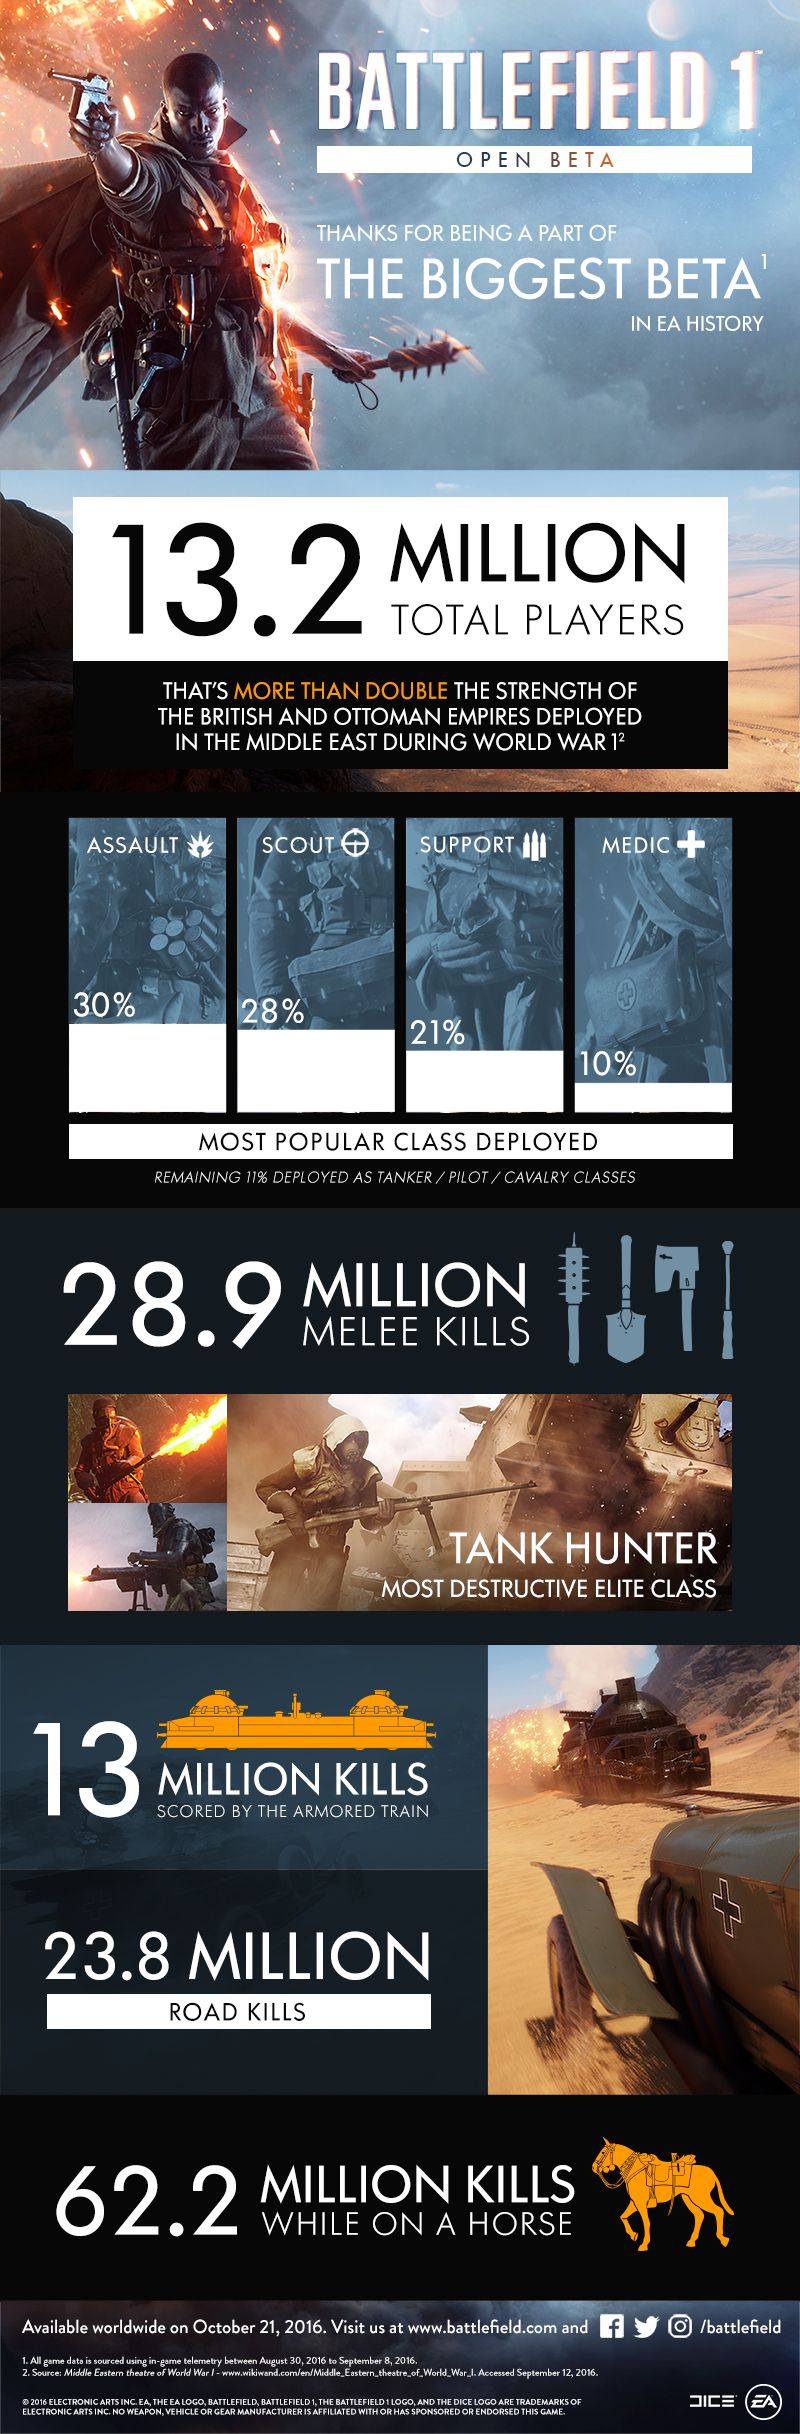 Battlefield 1 beta official infographic shows that it had 13.2 million players, making it the largest multiplayer beta of all time.